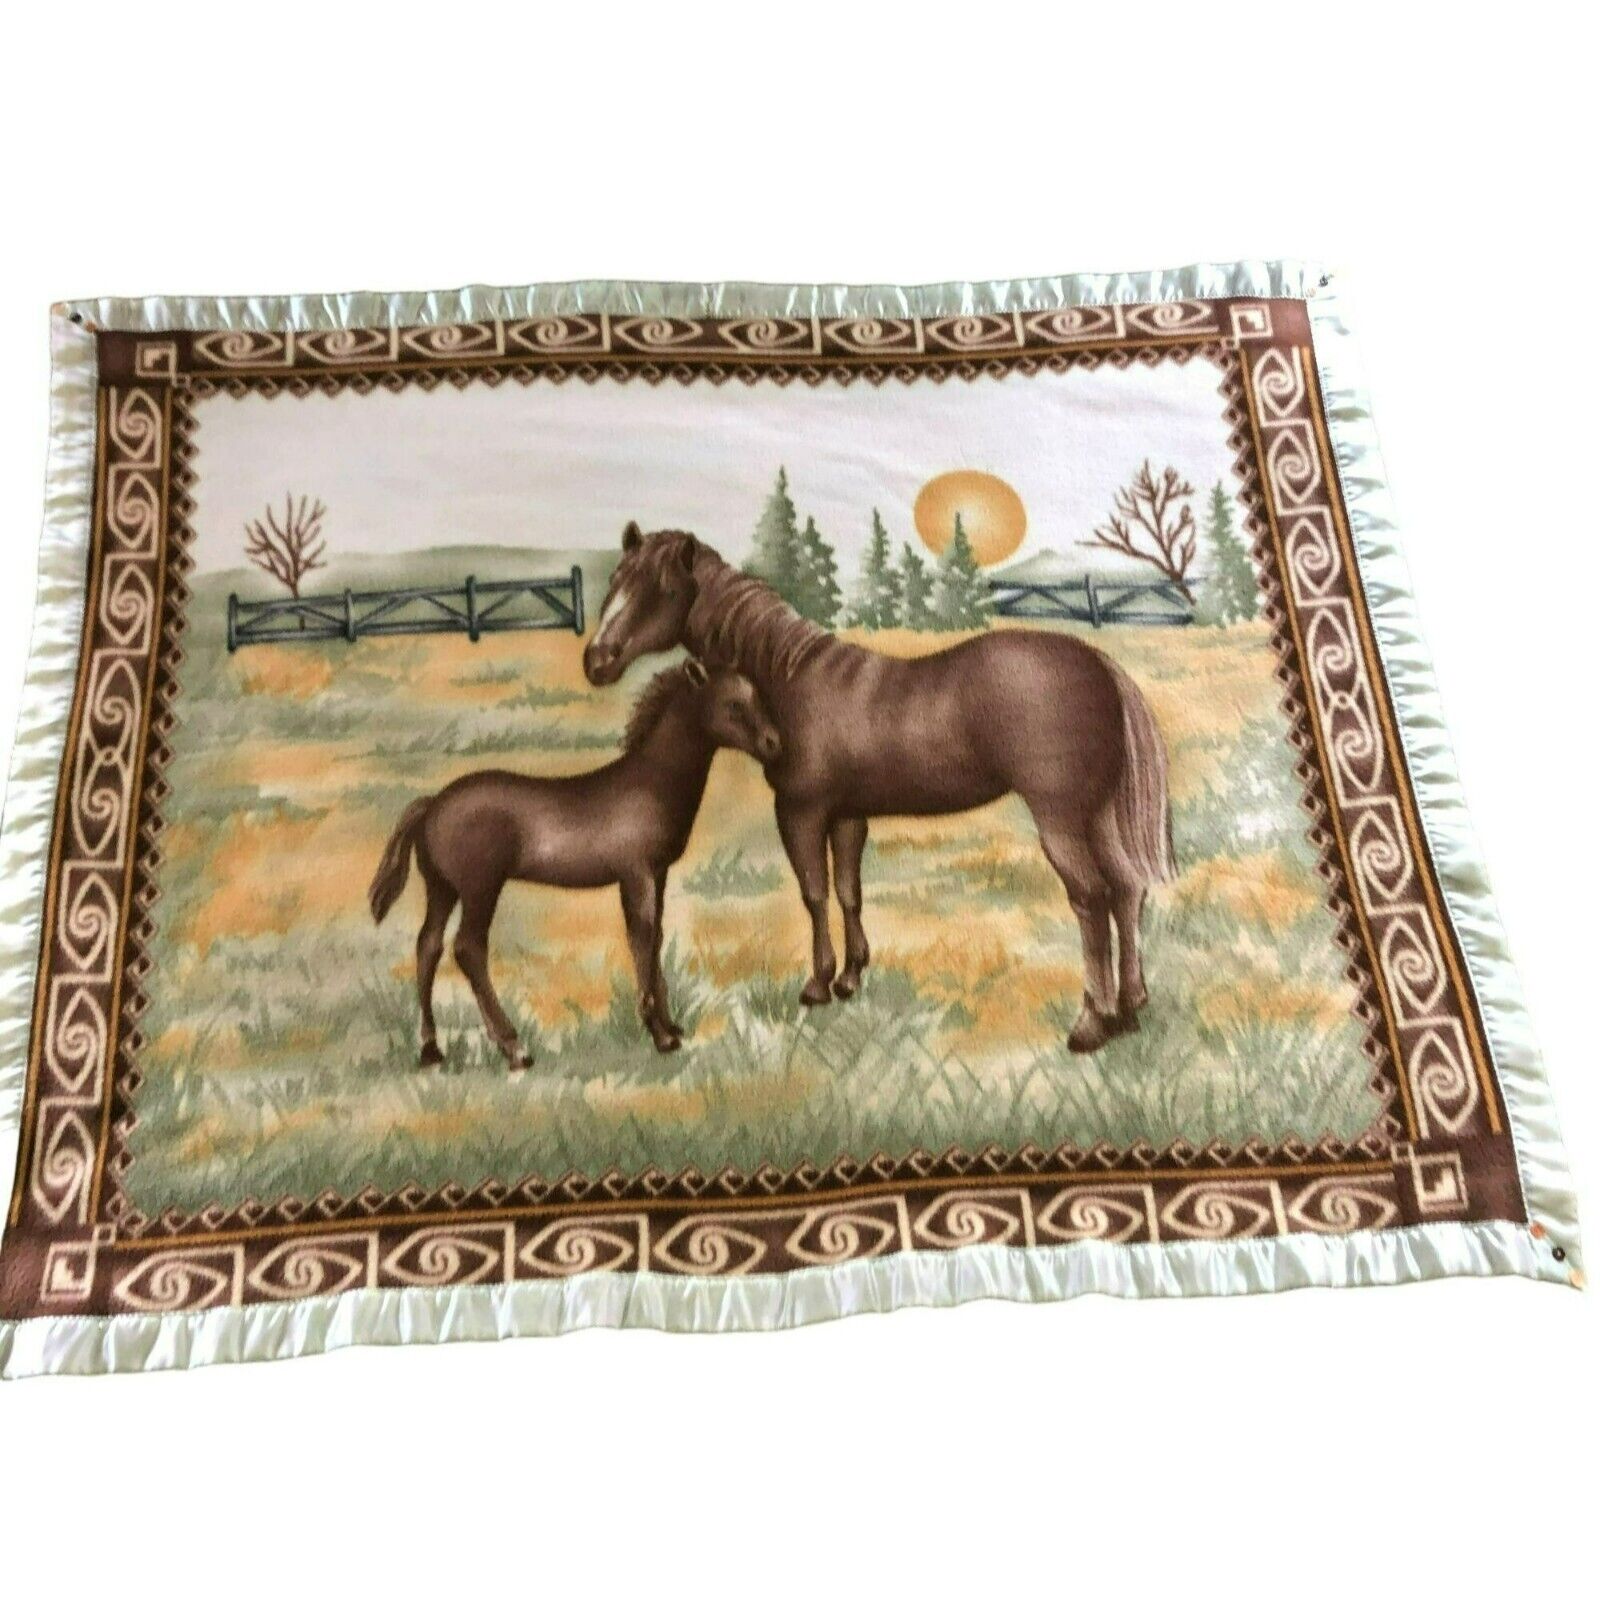 VTG SATIN TRIM HORSE BLANKET HAND SEWN TRIM BUTTONS DOUBLE SIDED 63\